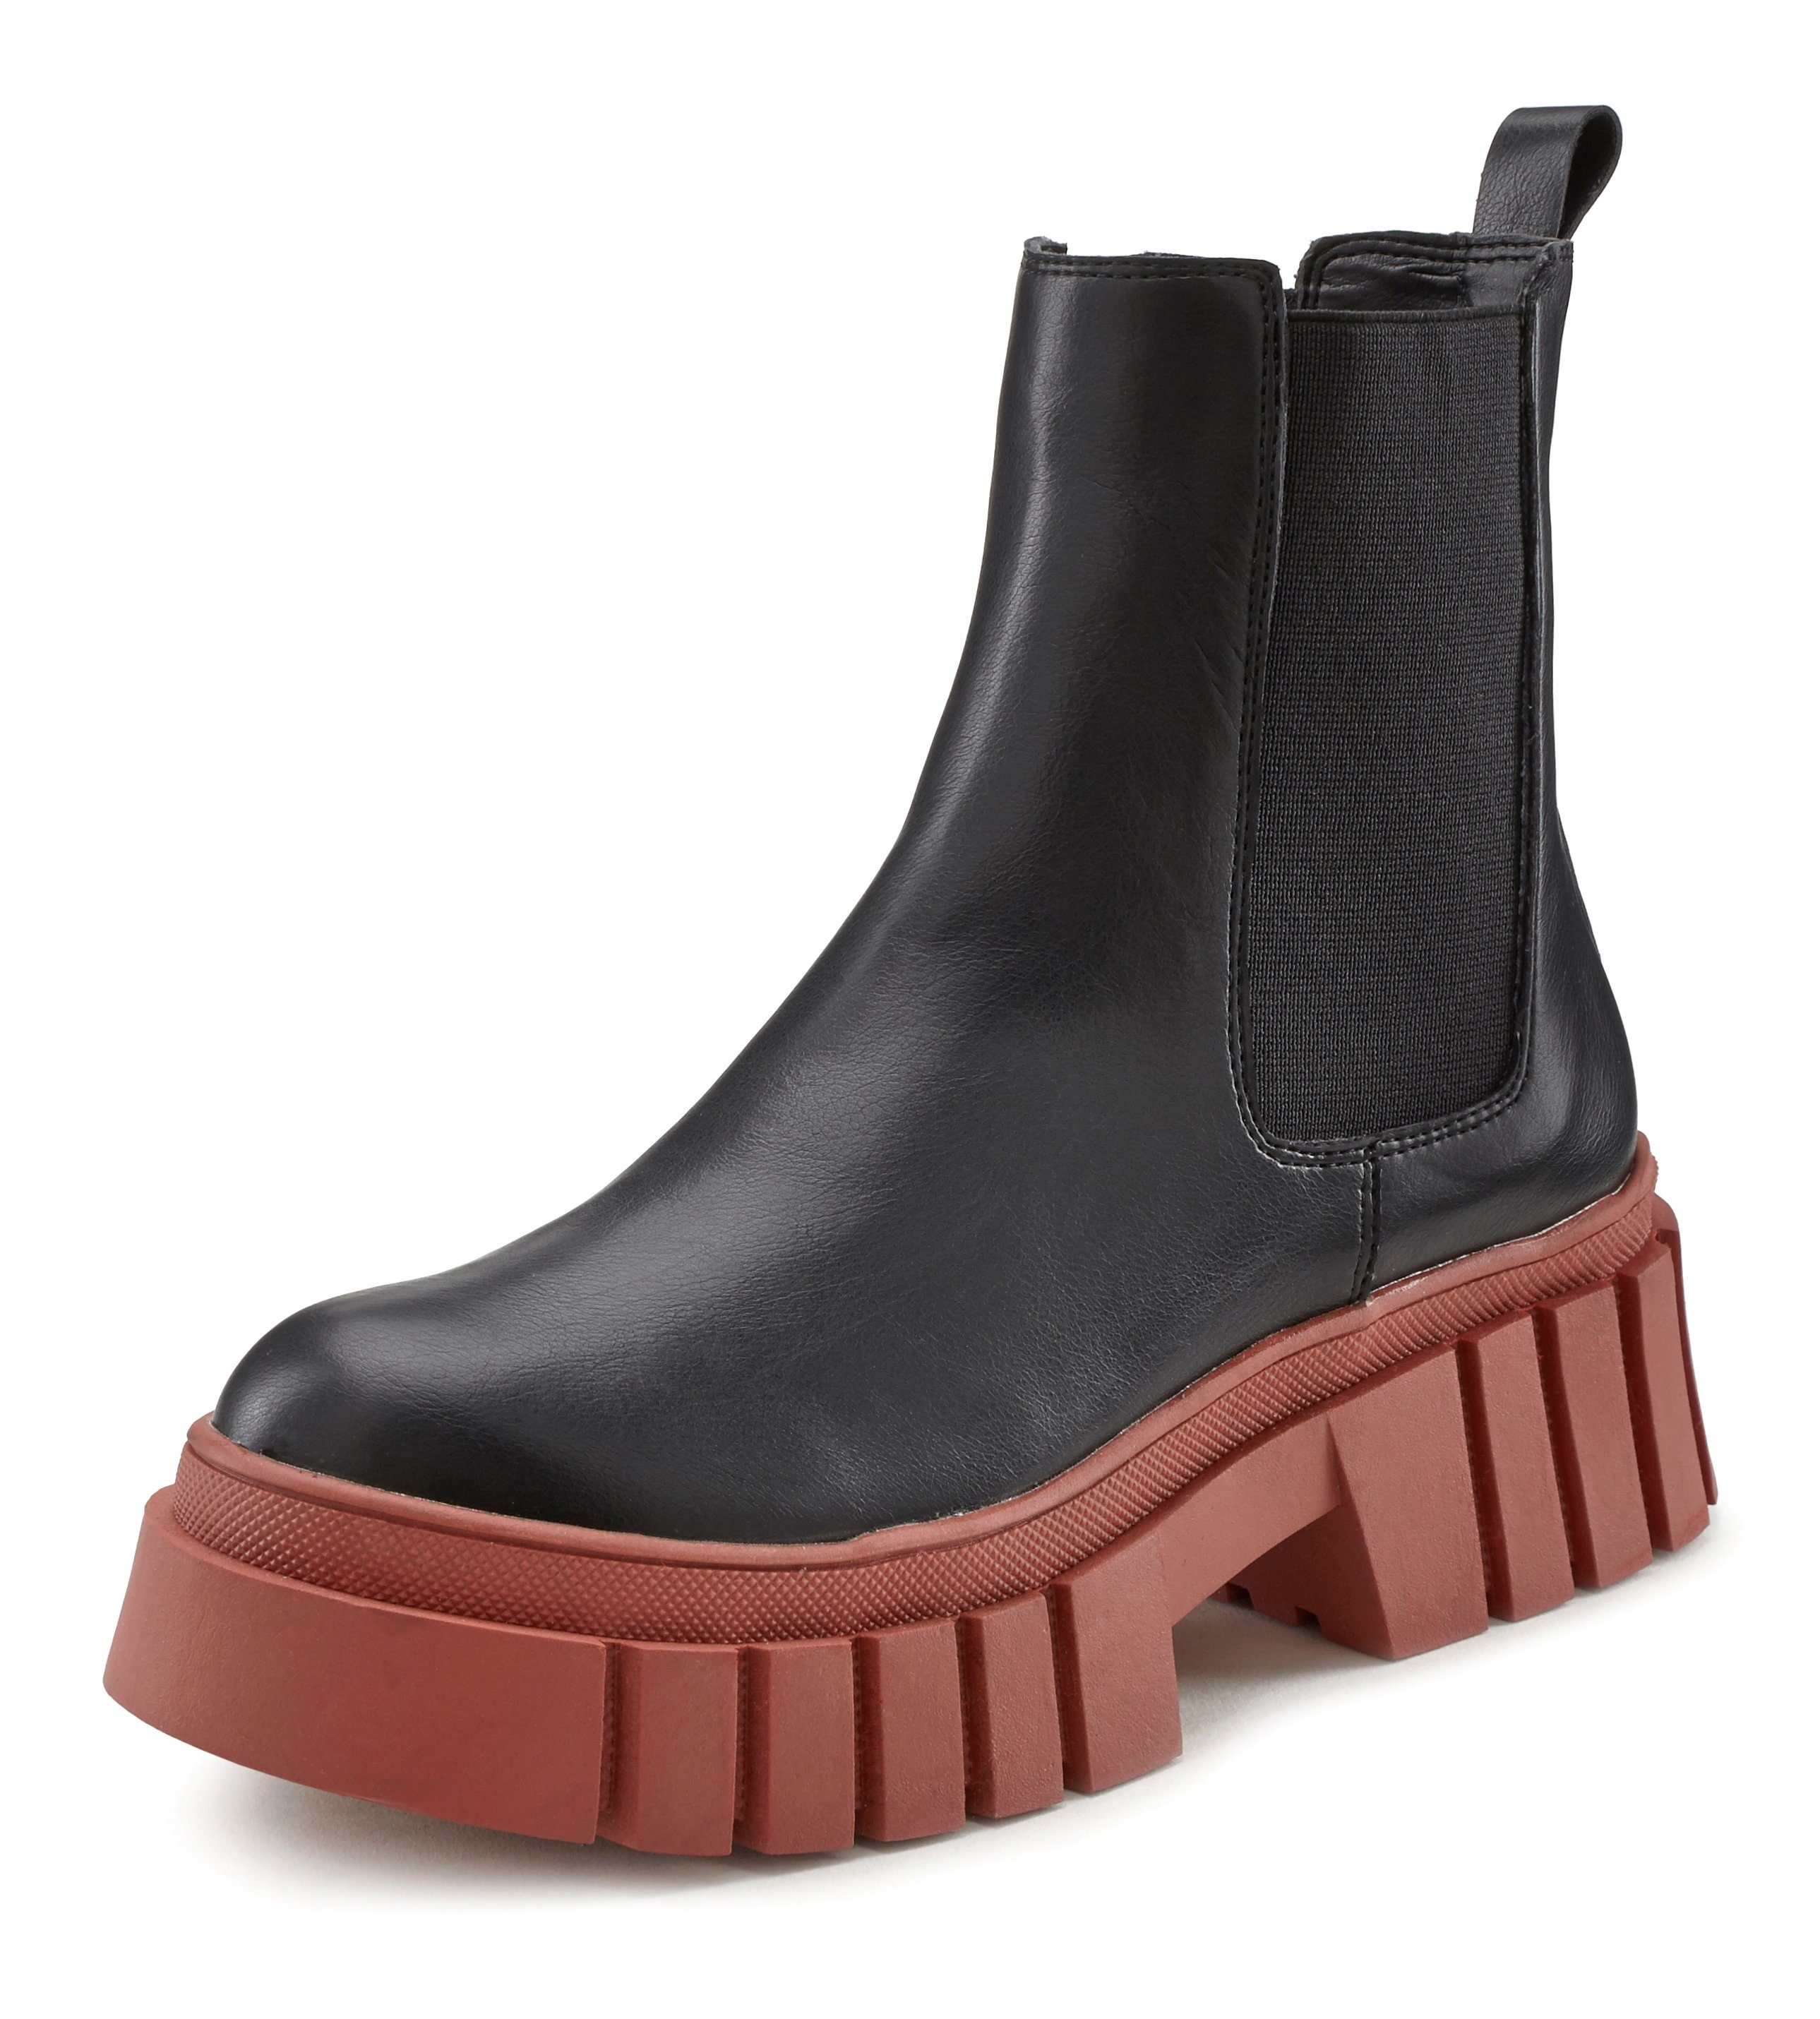 trendigen Chunky Boots Chelseaboots mit Plateaustiefelette, im Farbmix, Sohle LASCANA Ankle